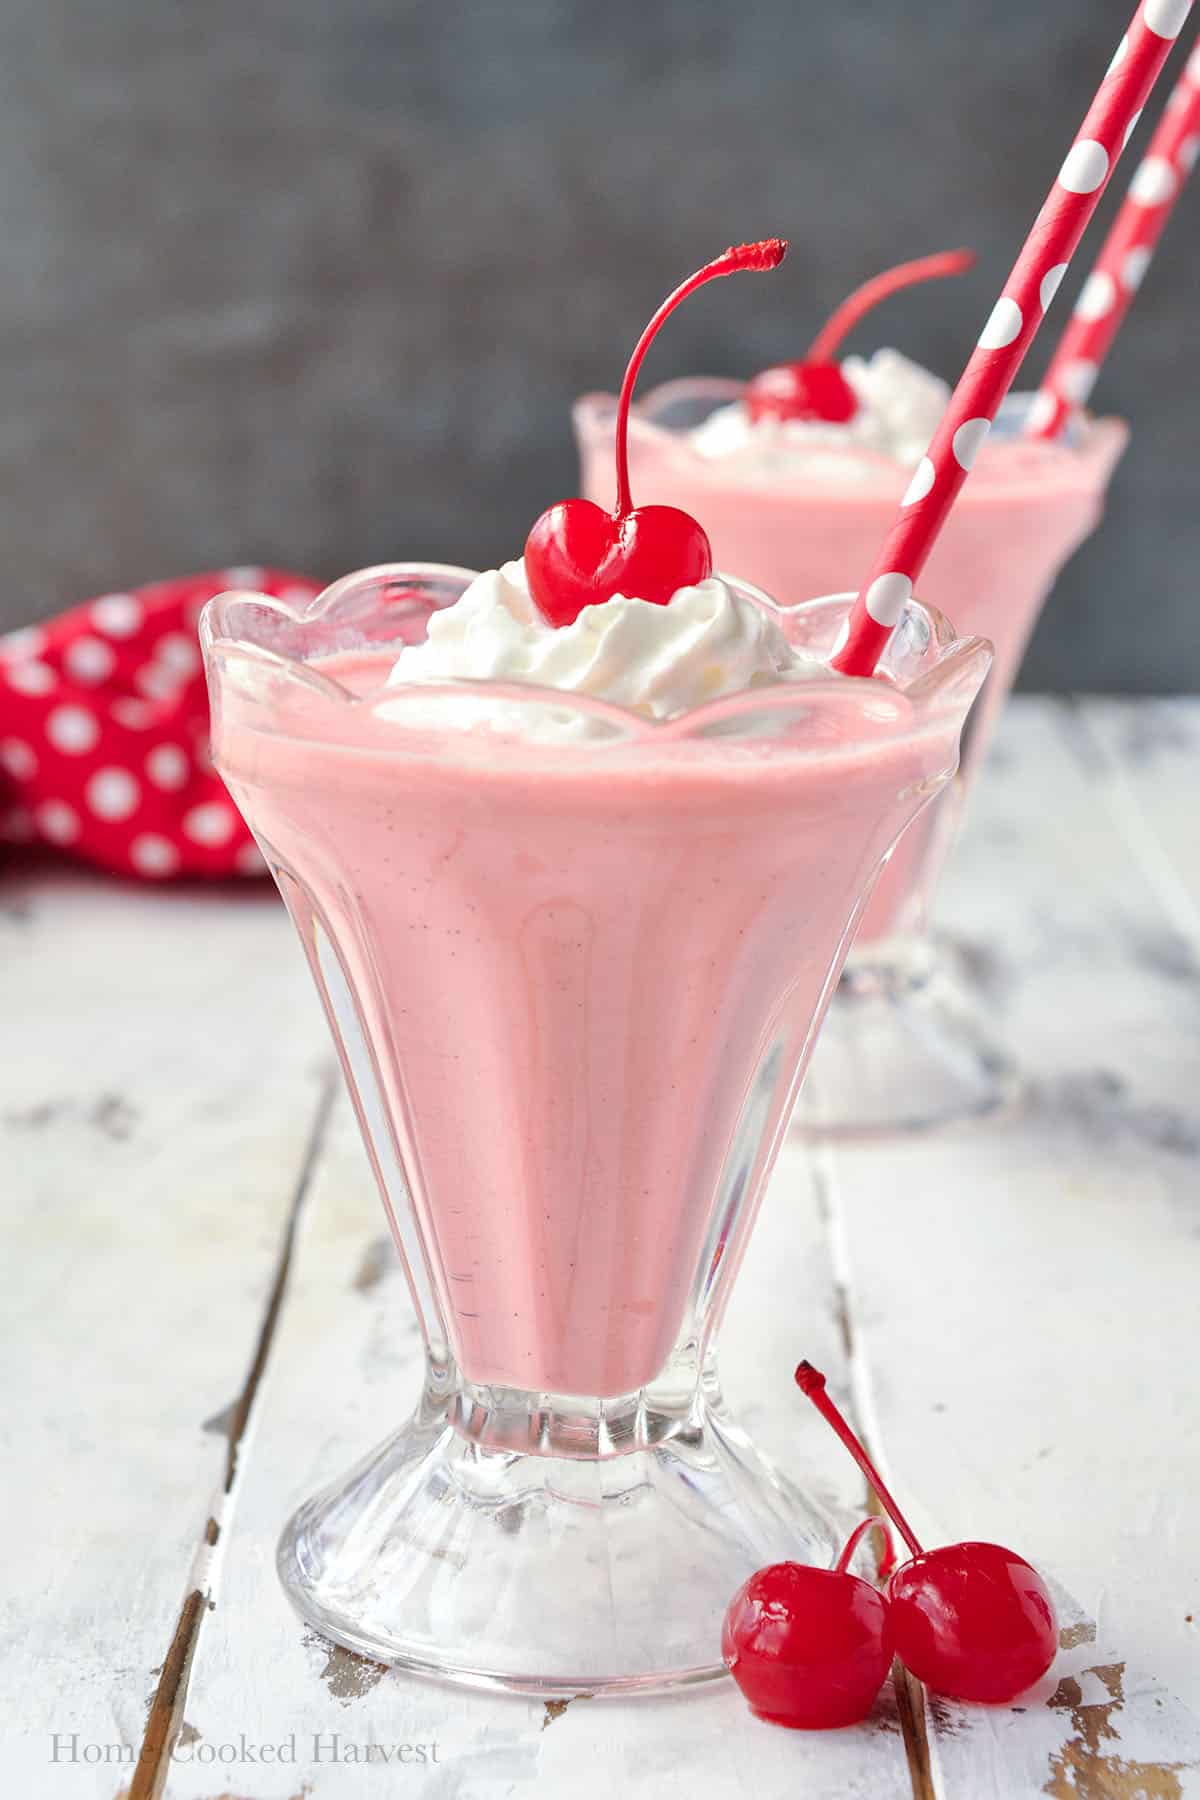 Can You Make a Milkshake with Heavy Whipping Cream? Delicious Recipe Revealed!